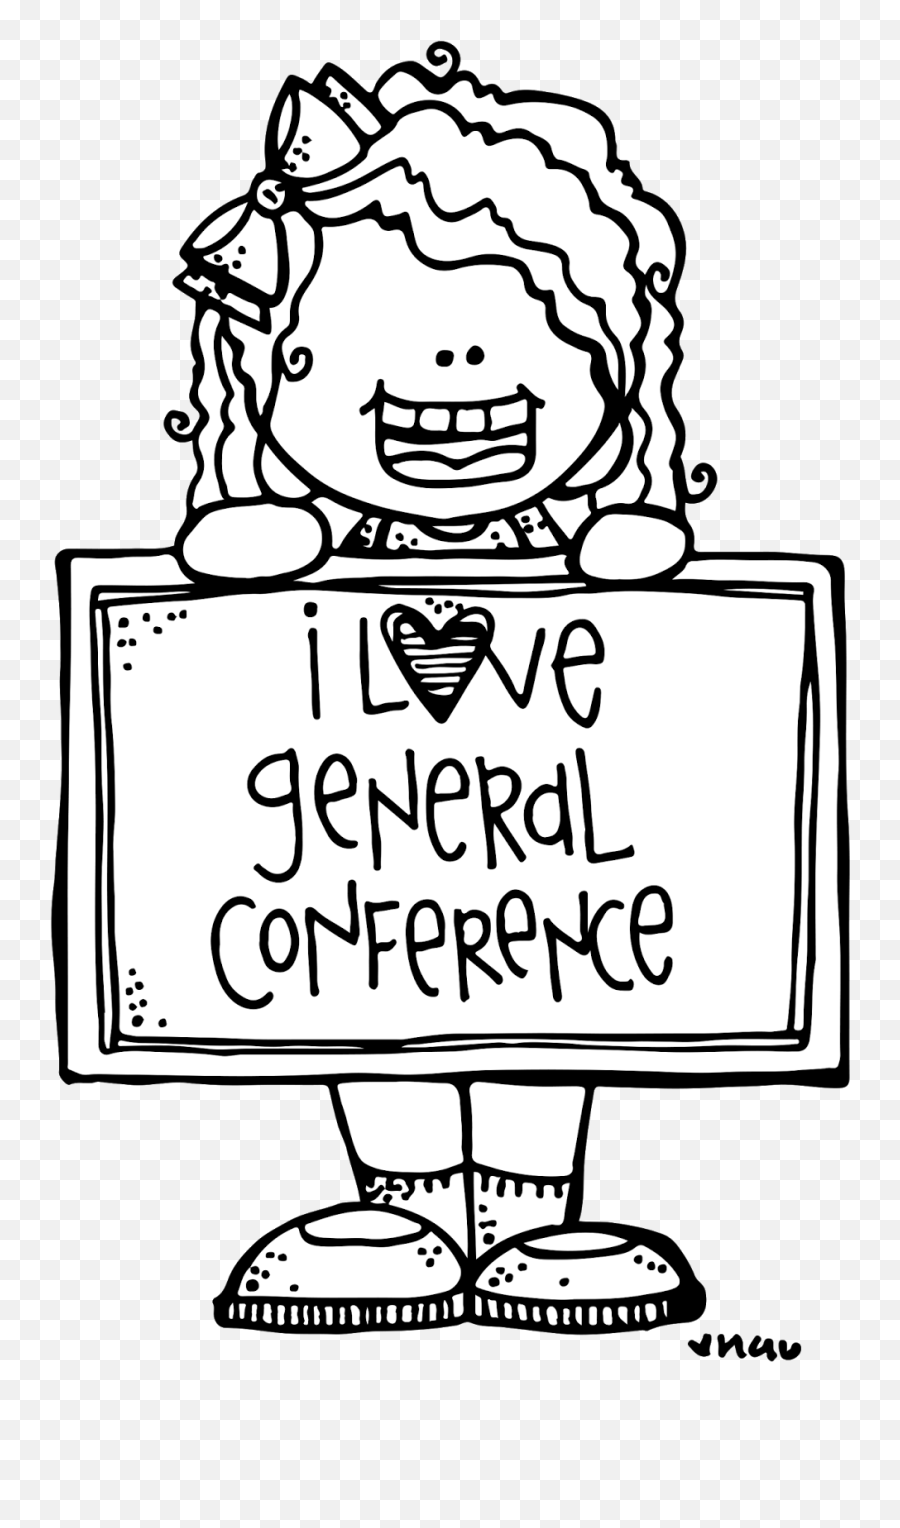 Just In - General Conference 2020 Lds Clipart Emoji,Lds Clipart